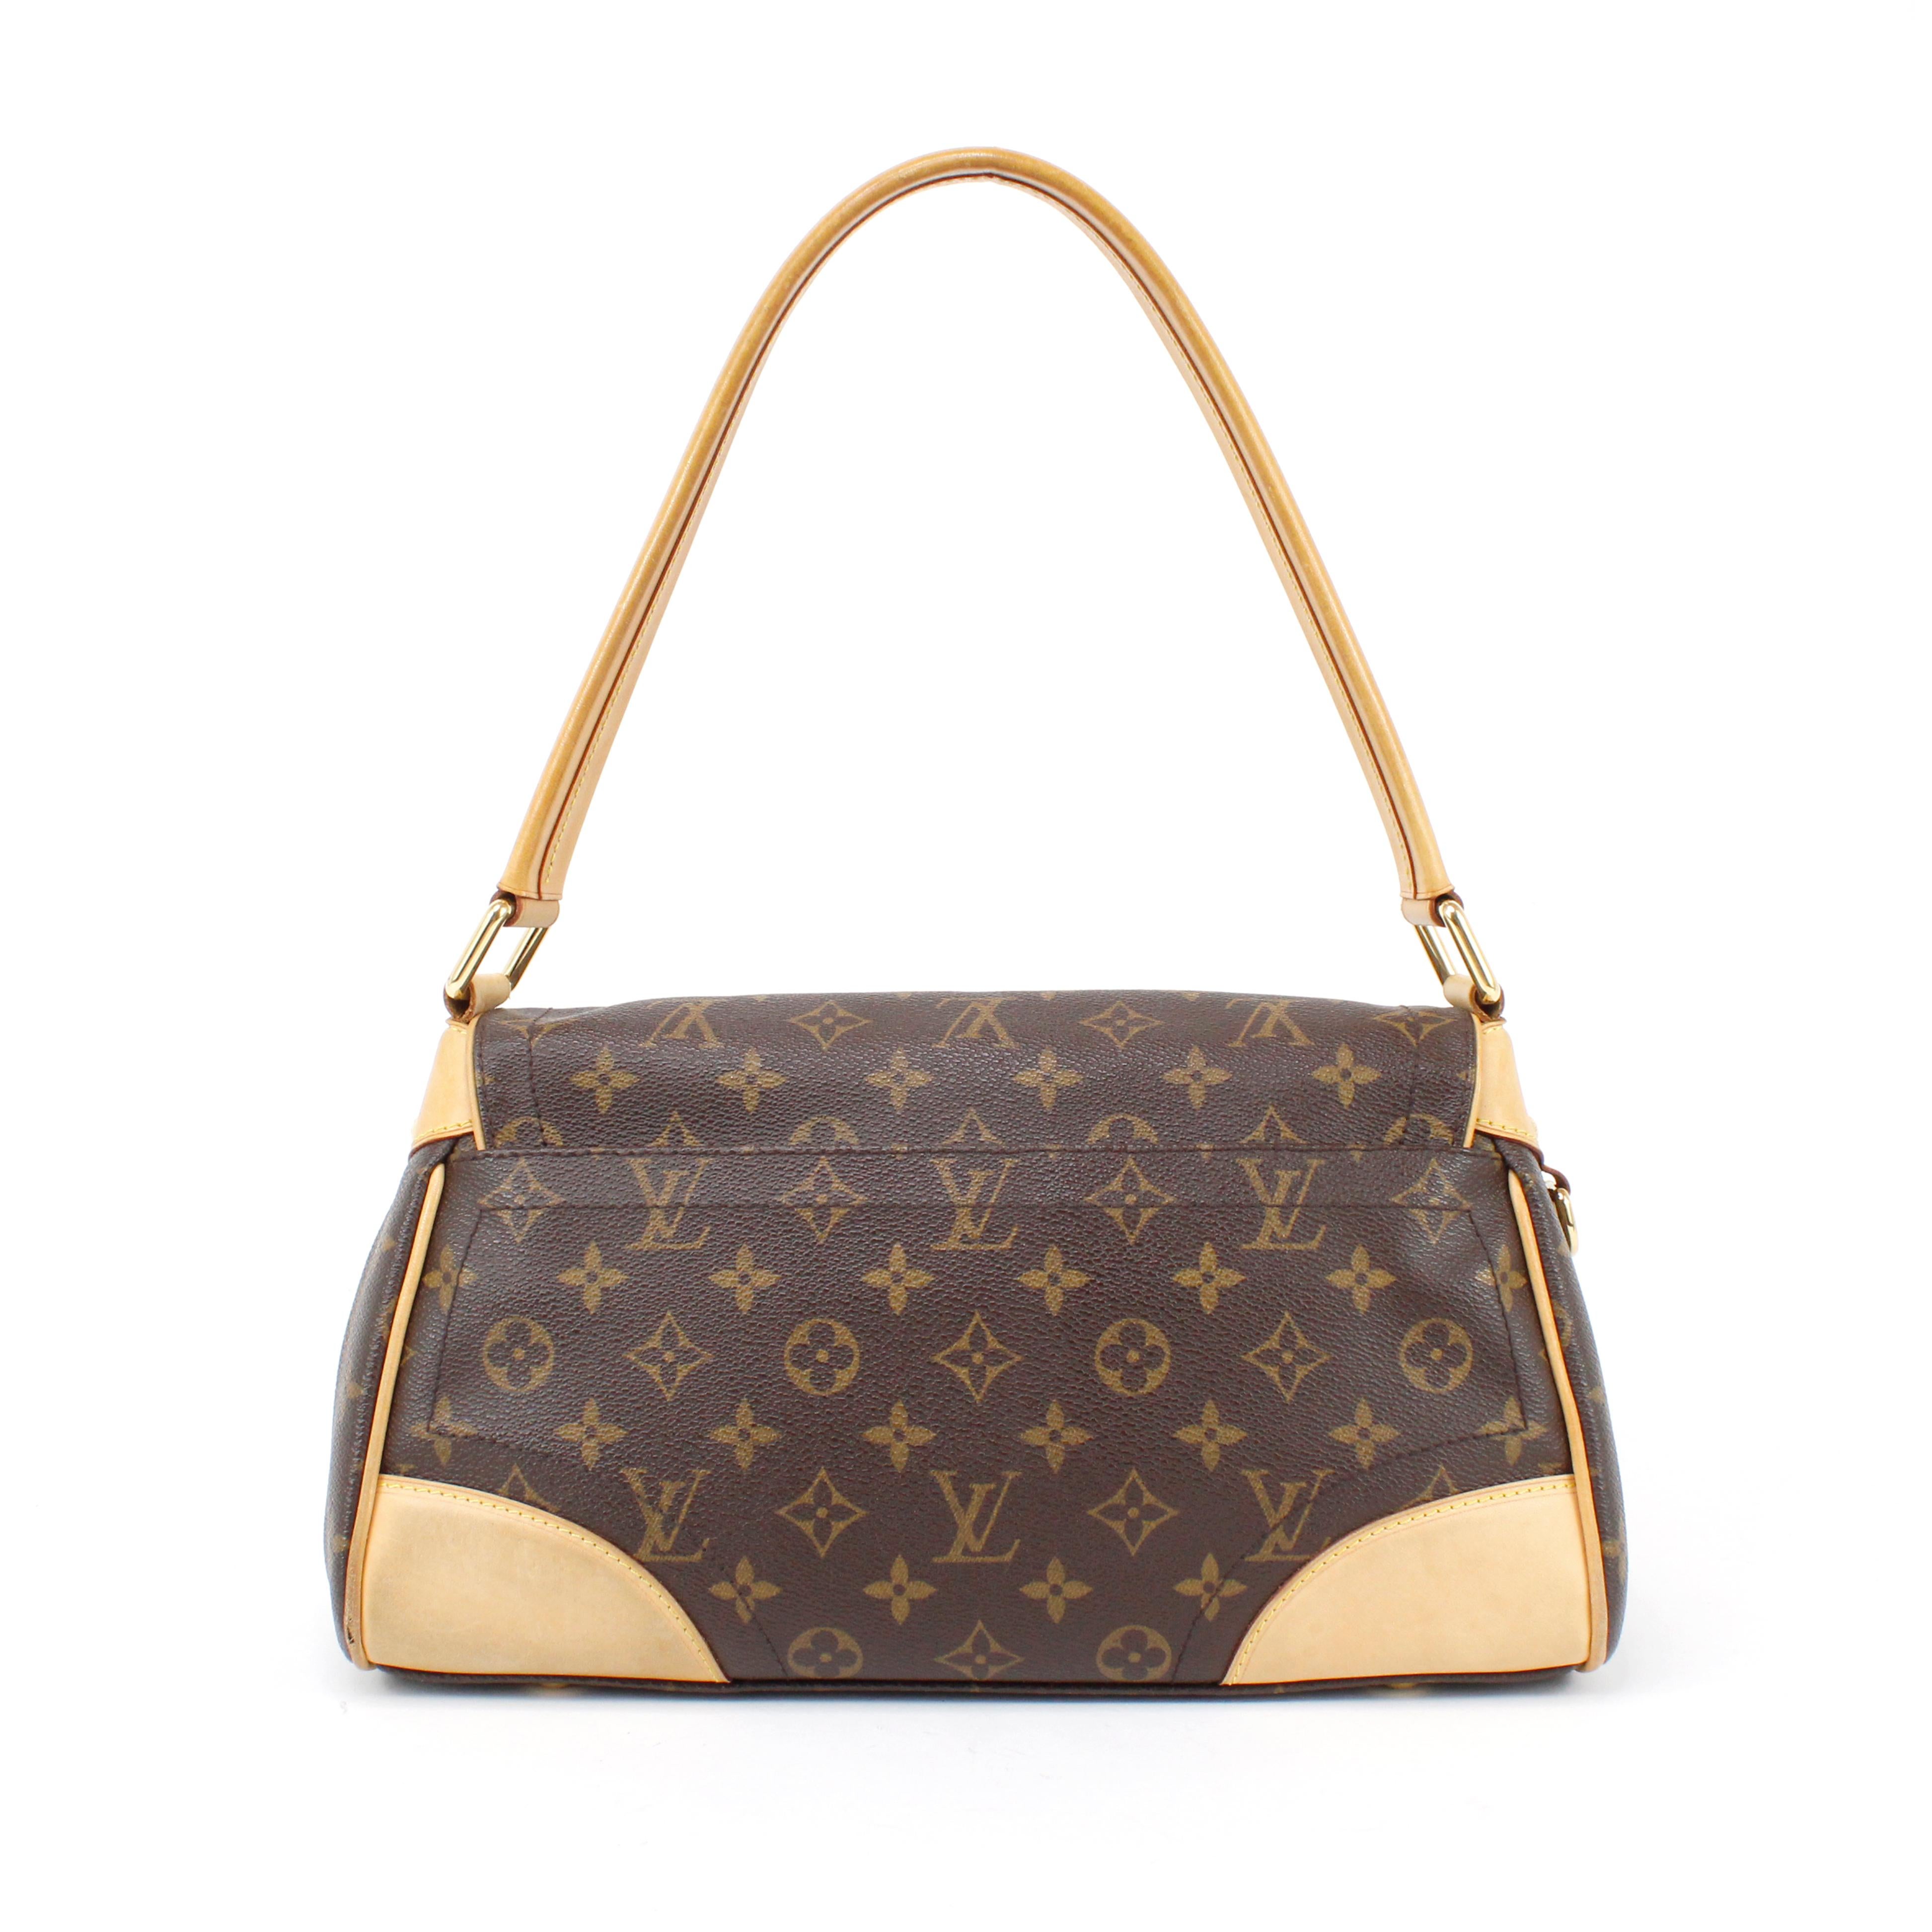 Louis Vuitton Bag With Leopard Print -4 For Sale on 1stDibs